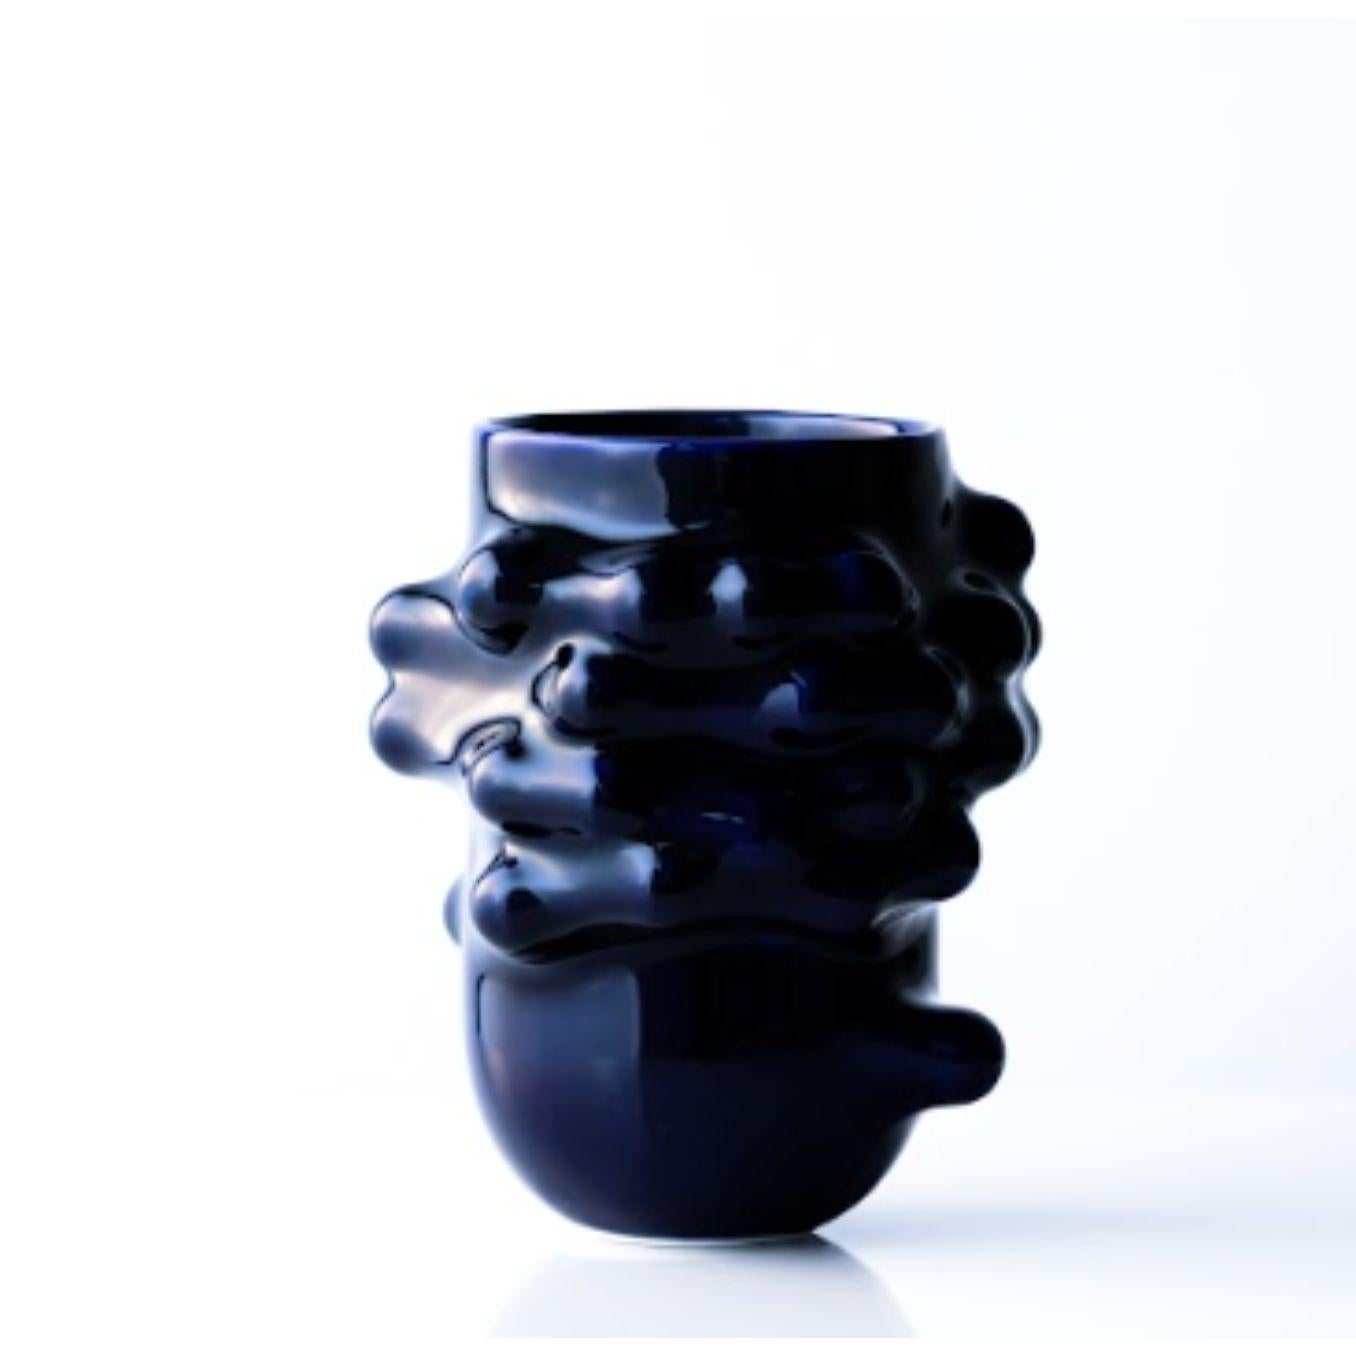 Arkadiusz Szwed Bumps 2.0 Vase by Nów
Designed by Arkadiusz Szwed
Dimensions: D 16 x W 16 x H 20 cm
Materials: glazed porcelain, cobalt

BUMPS 2.0 is a set of ceramic objects that were created as a result of an experiment with a new, personal